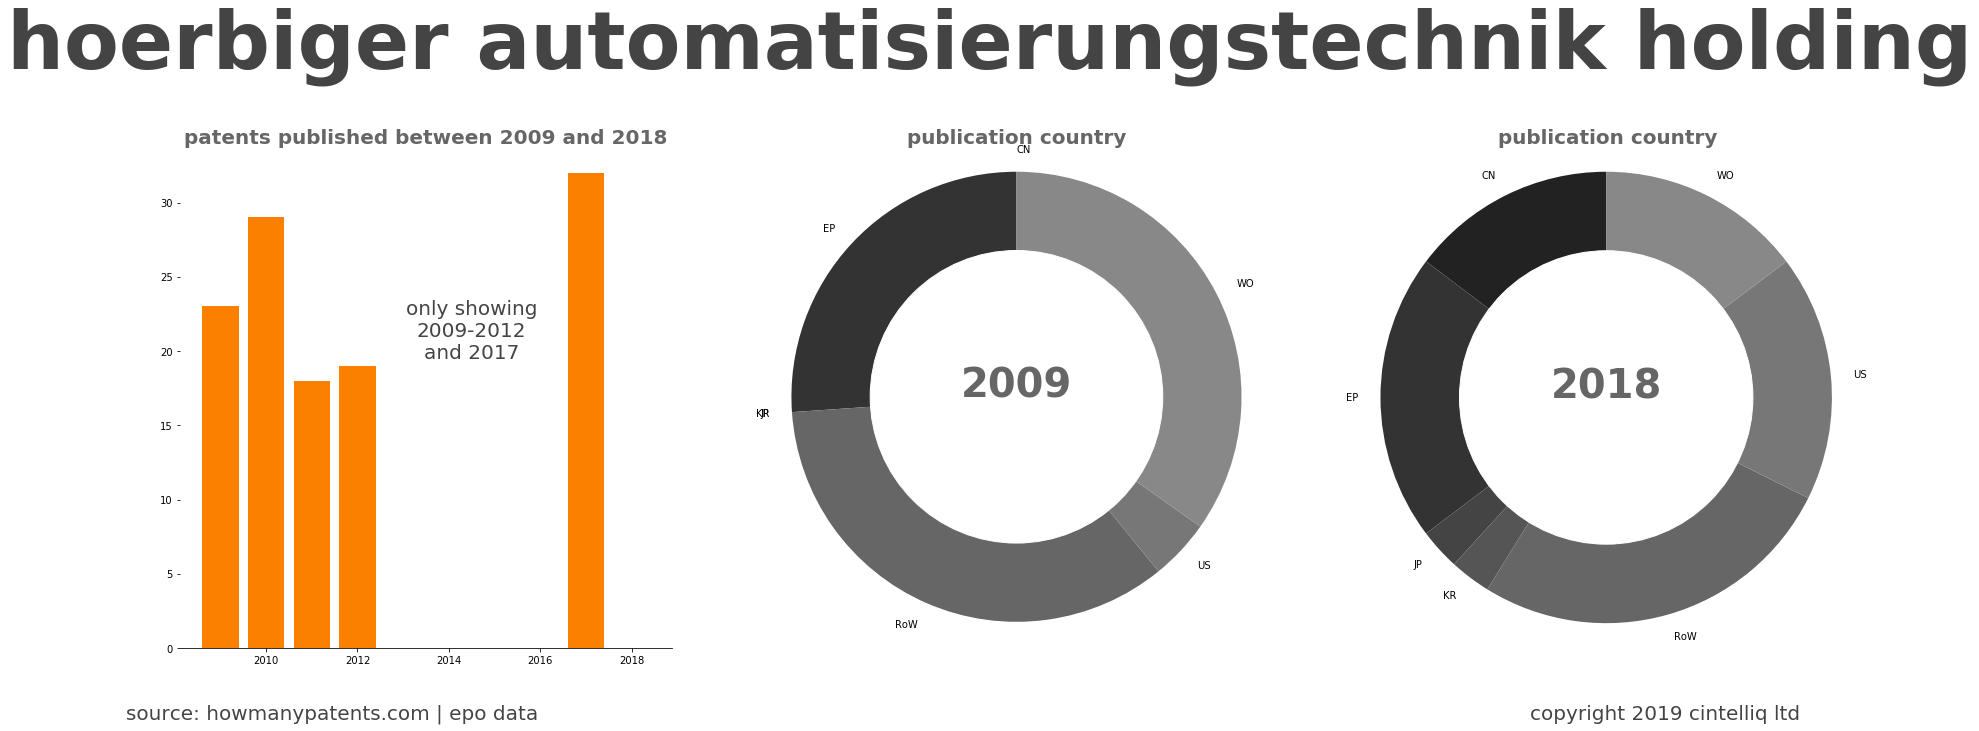 summary of patents for Hoerbiger Automatisierungstechnik Holding